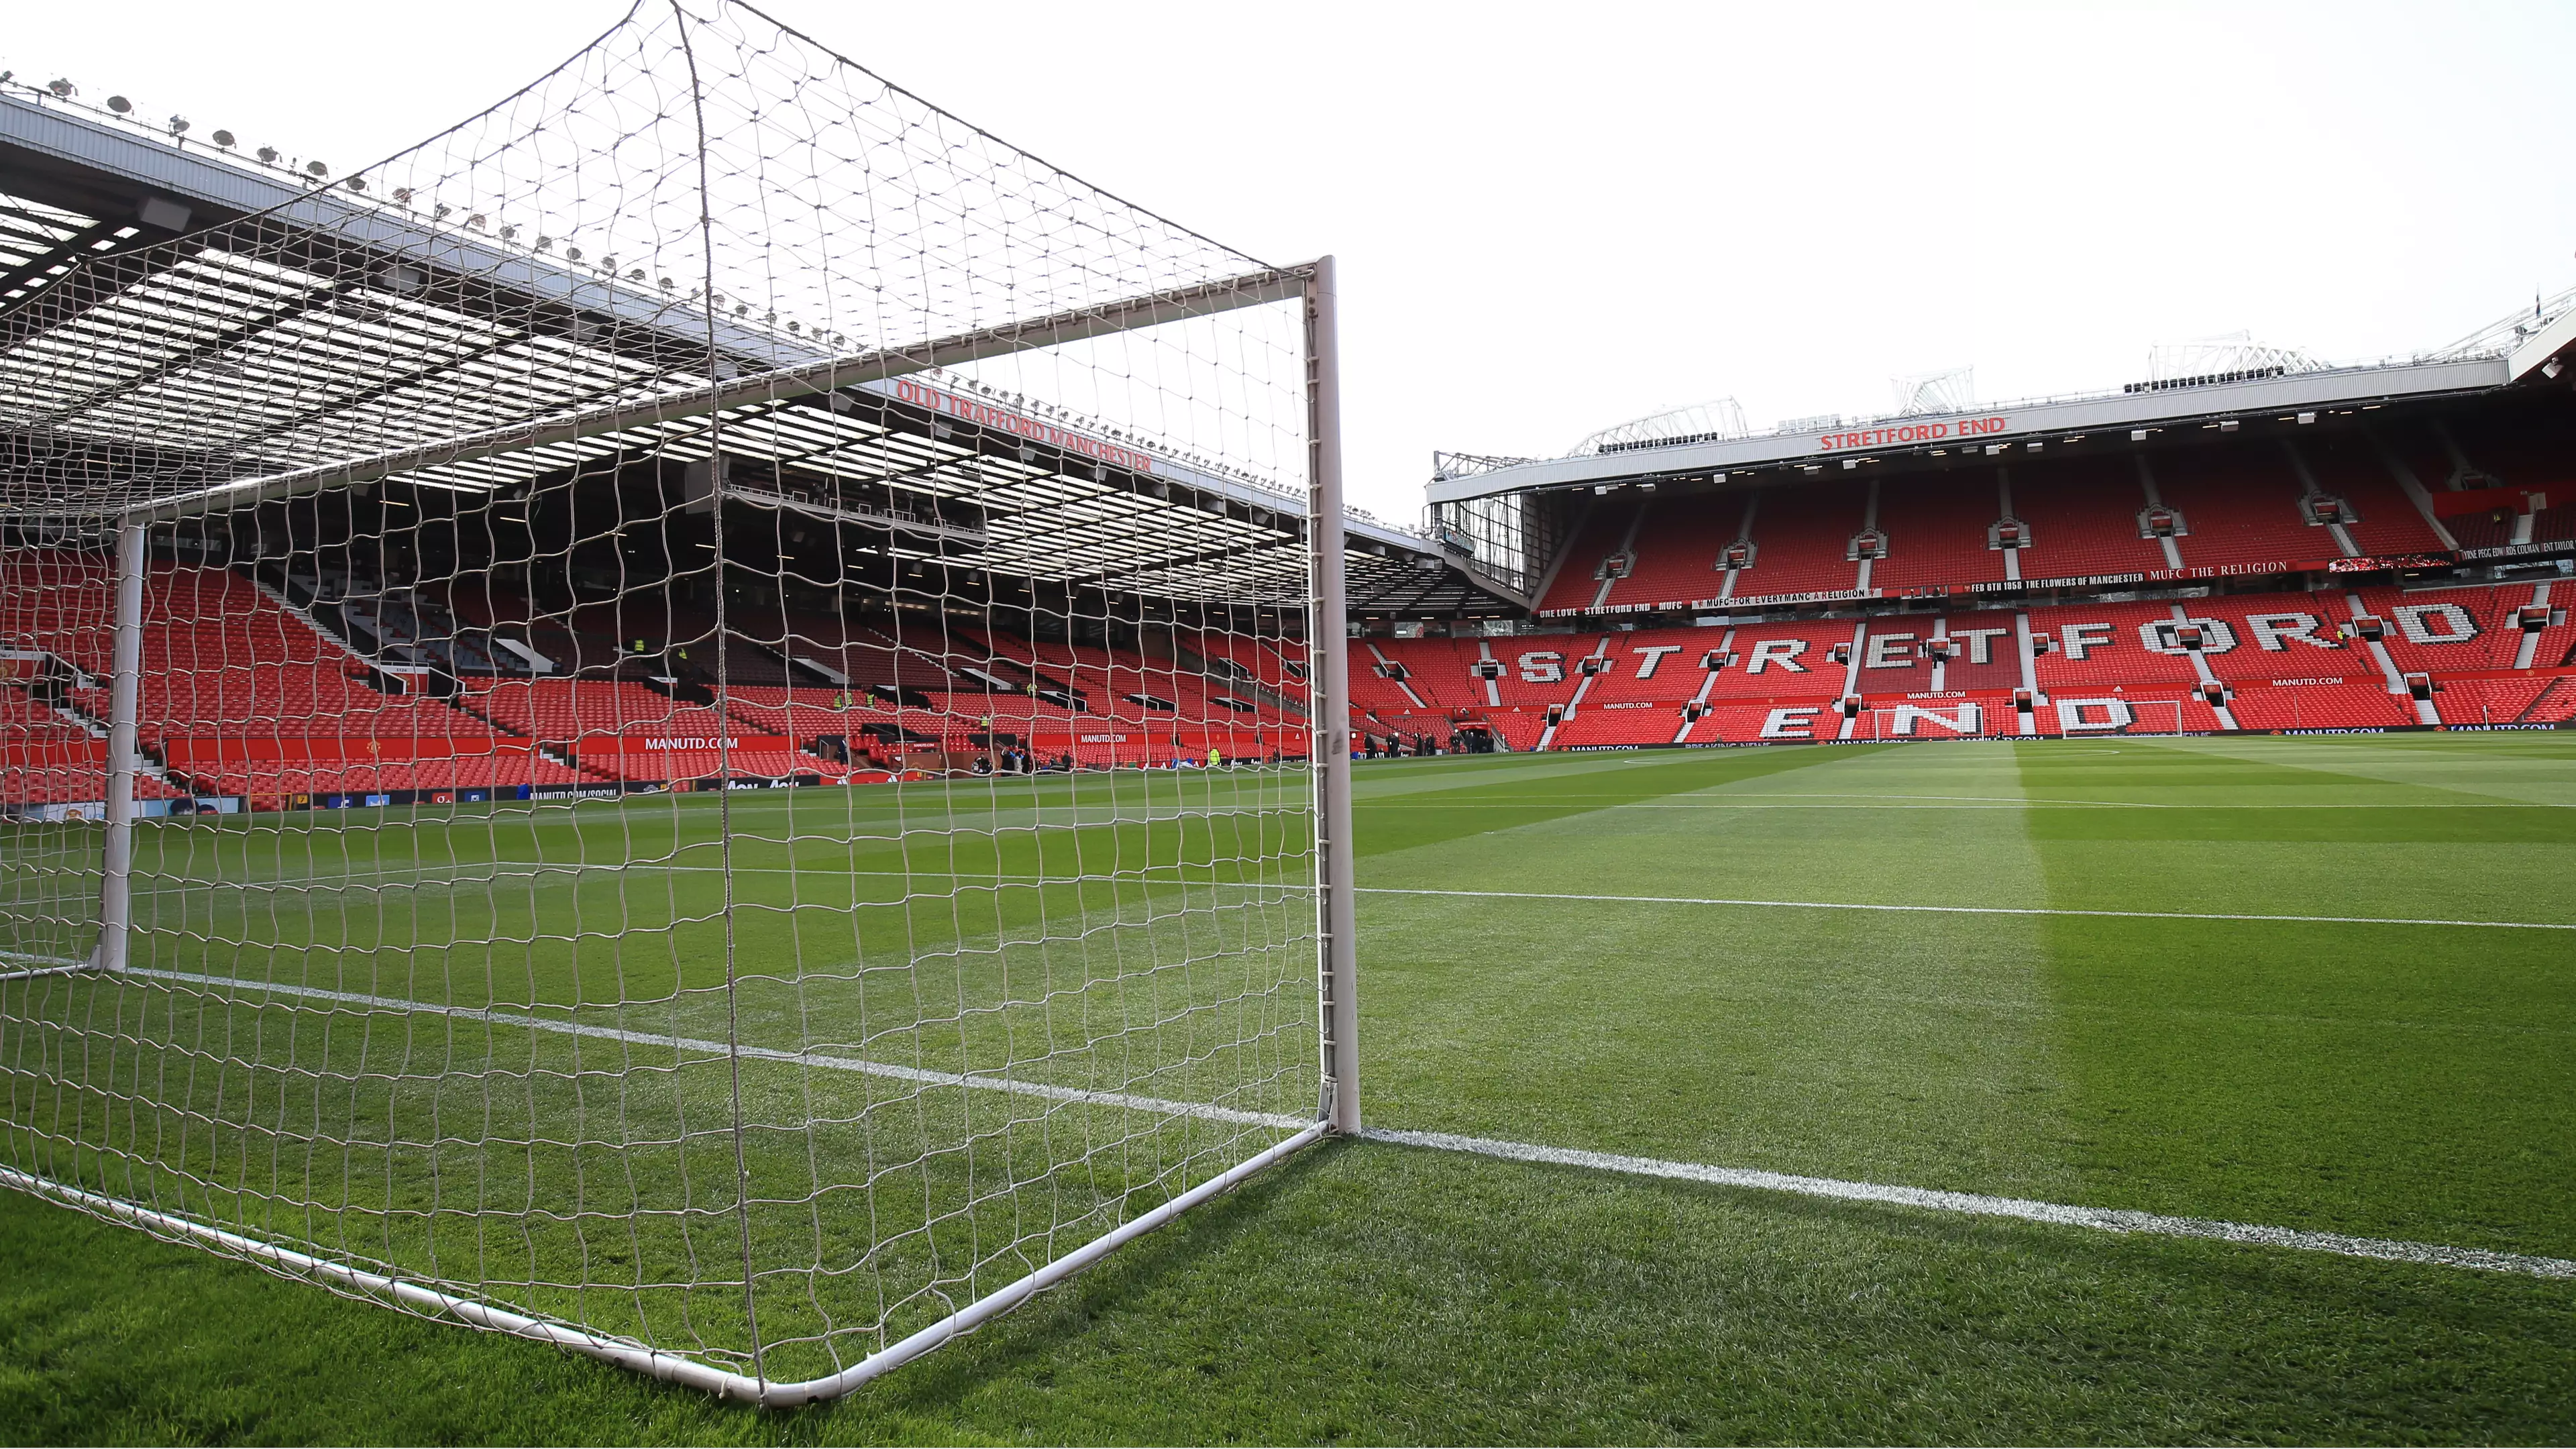 Manchester United To Introduce 'Atmosphere Section' At Old Trafford Next Season